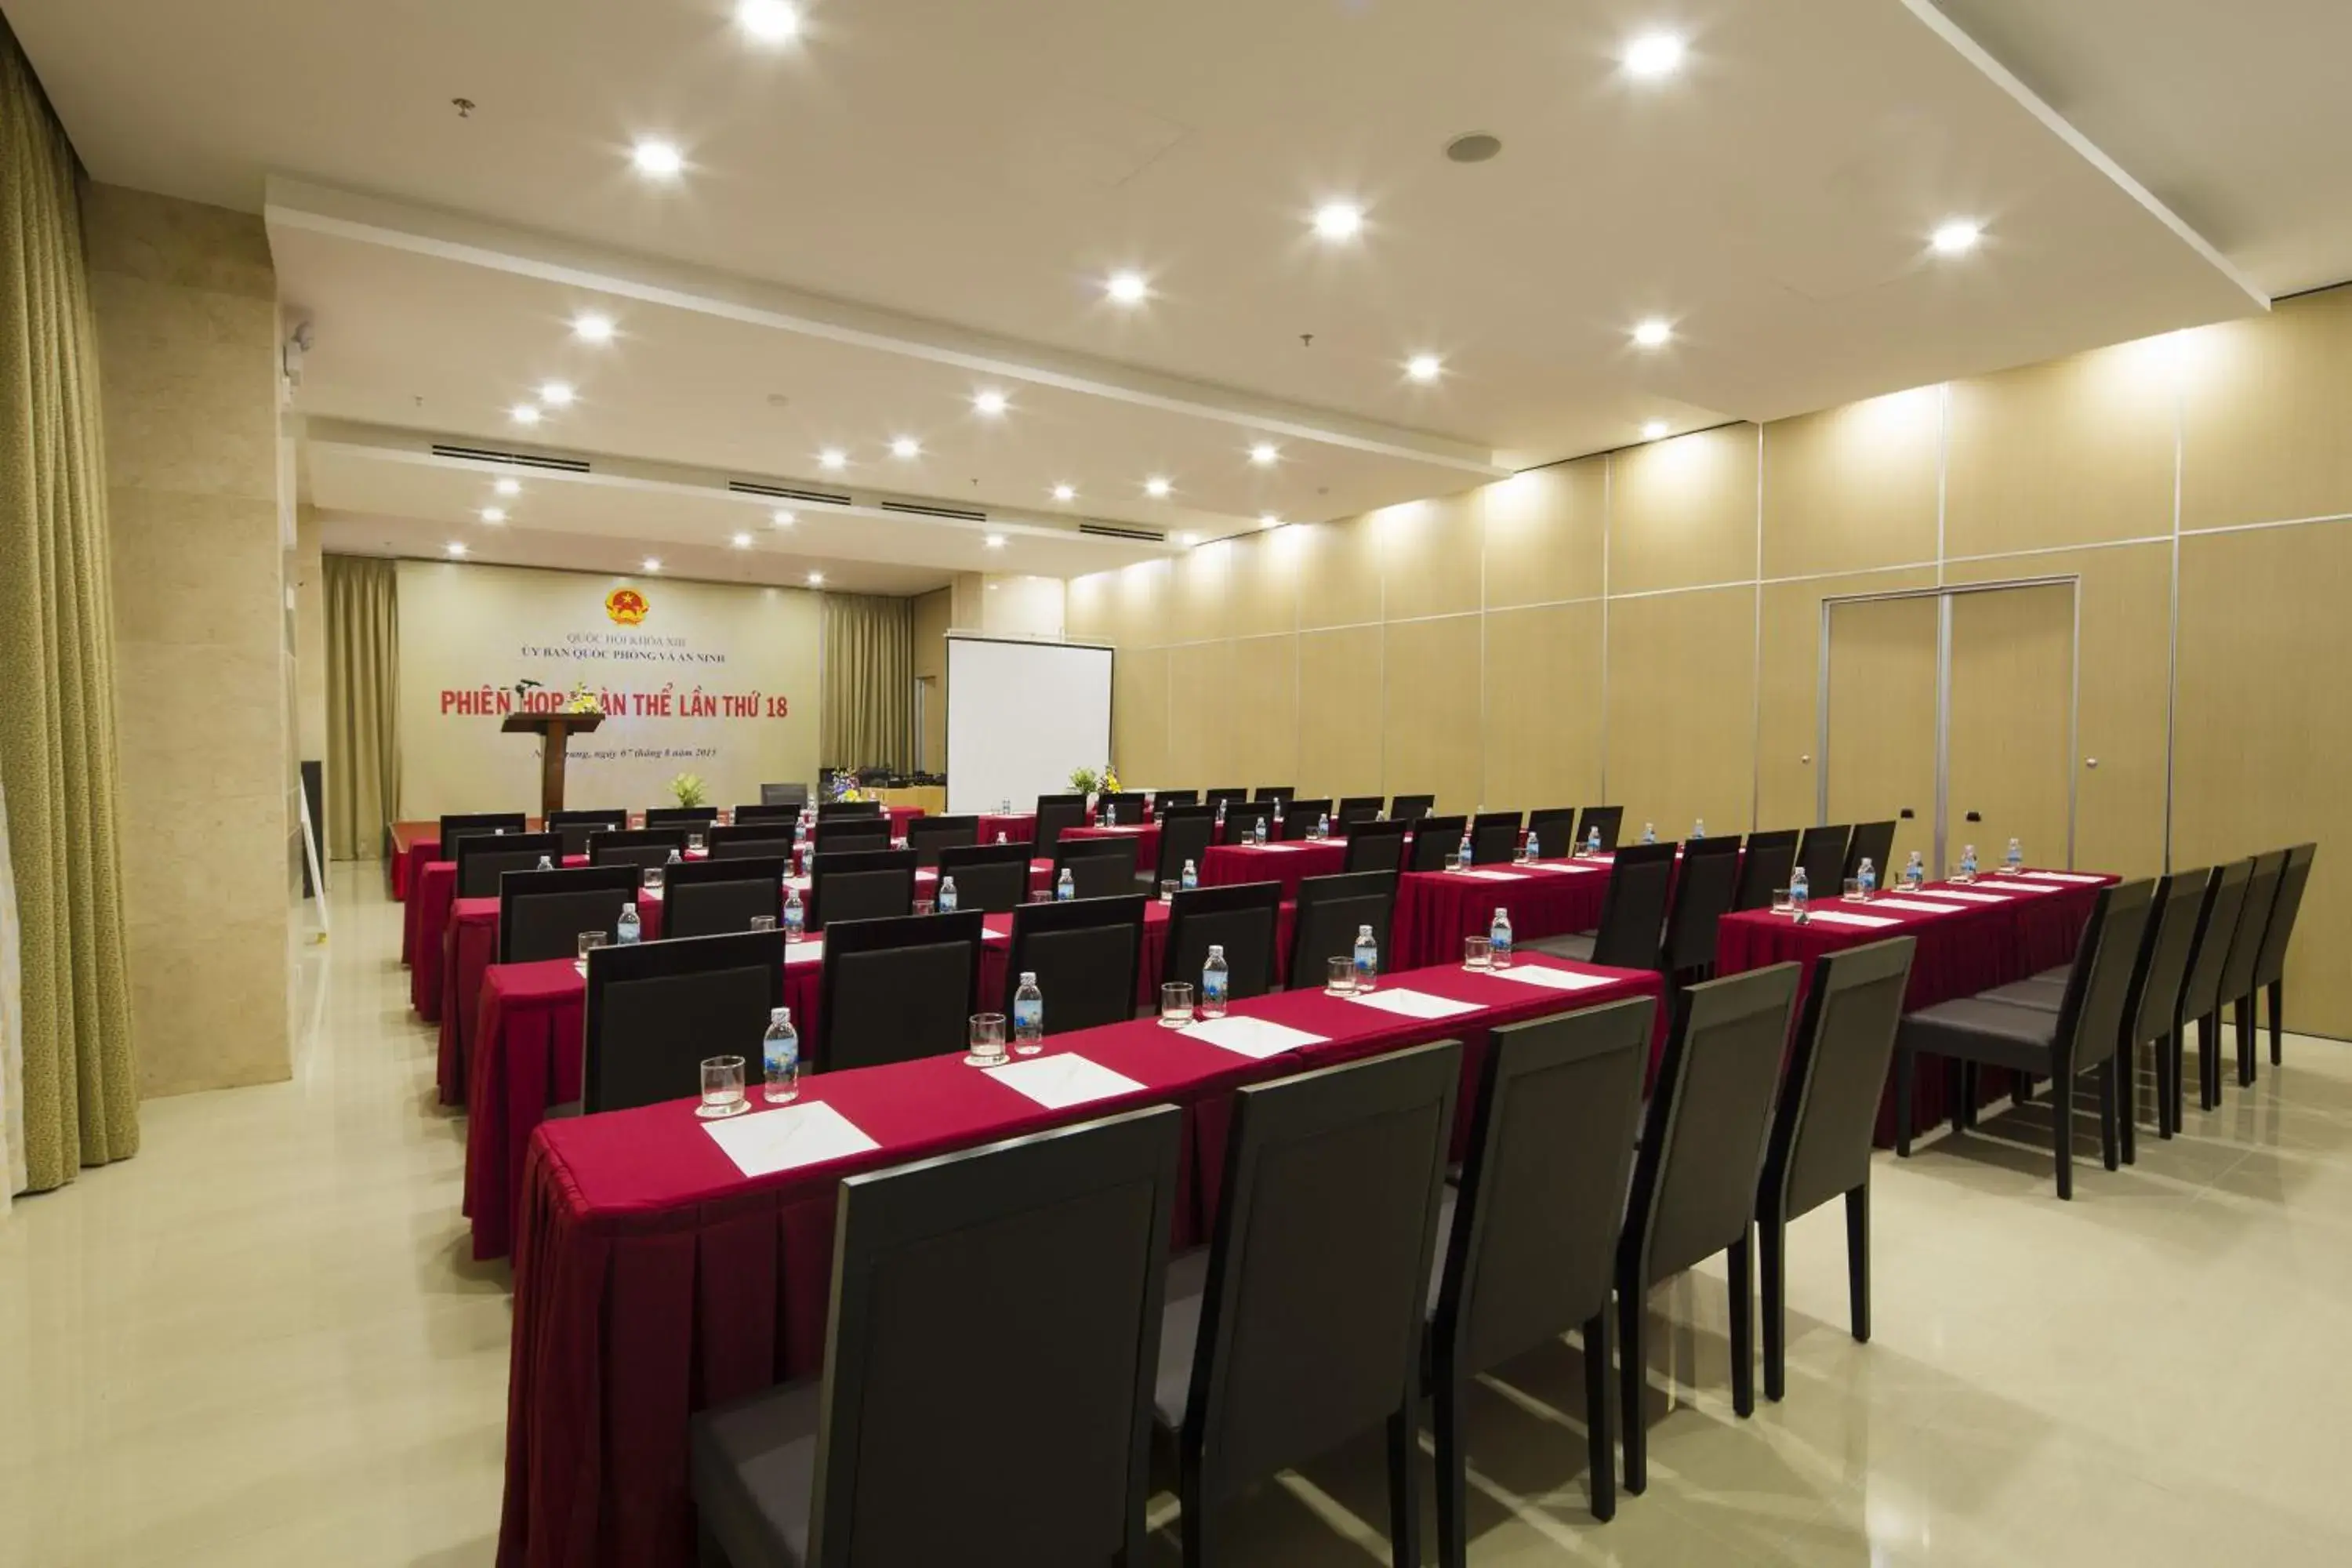 Banquet/Function facilities in Dendro Gold Hotel